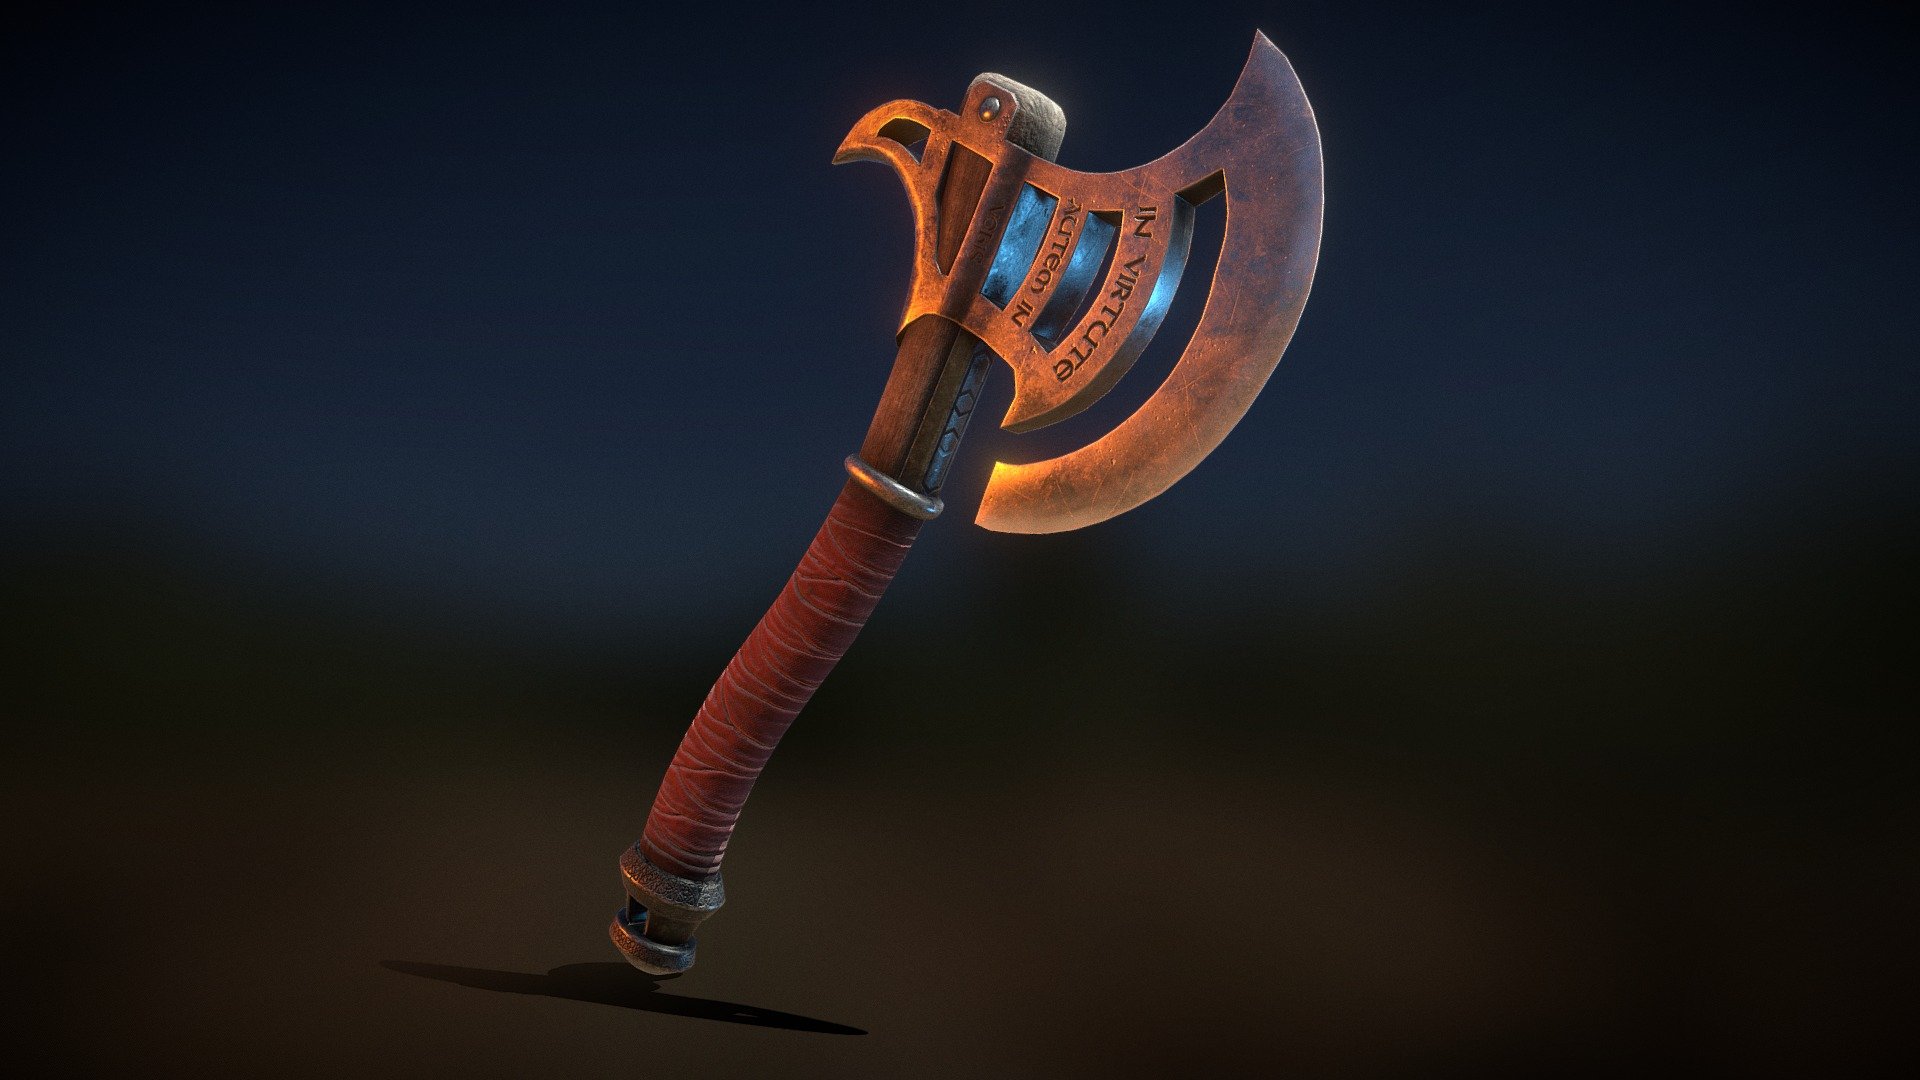 Compcept made by me, modeled on blender and textured on substance painter. 
Latin text on the blade &ldquo;In virtute autem in vobis